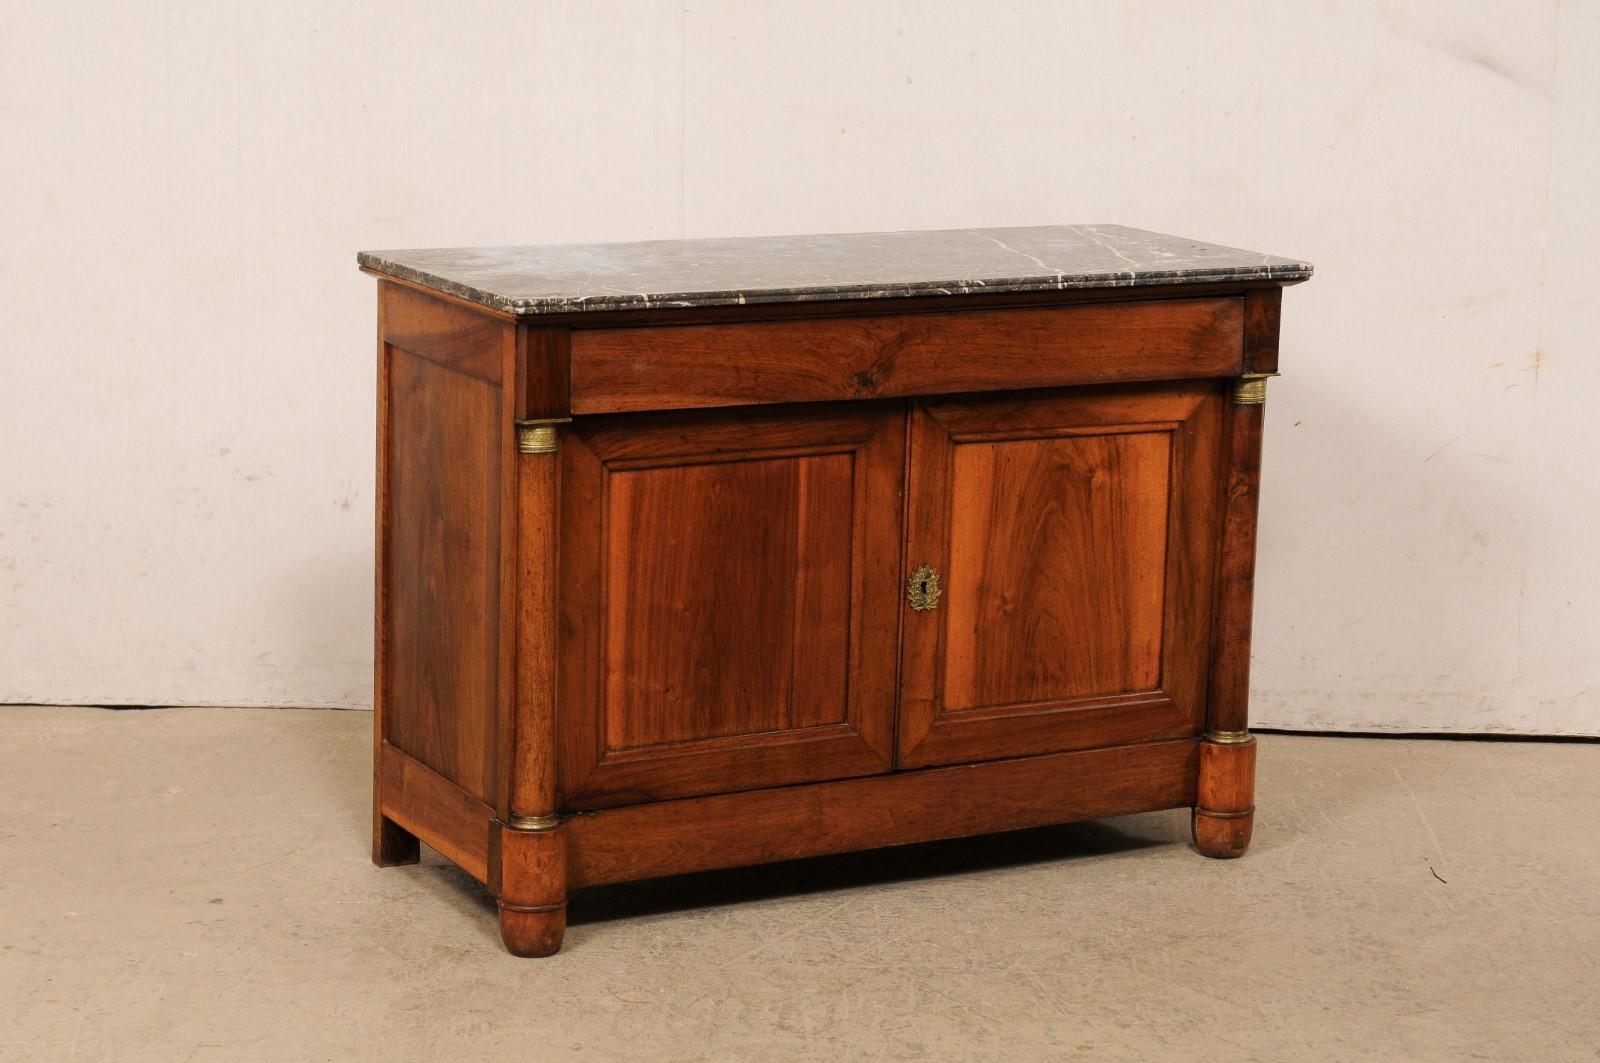 A French Napoleon III buffet, with its original marble top, from the early 19th century. This antique console from France, circa 1820's, features its original marble top over a case which houses a single drawer at top, over a pair of doors (with